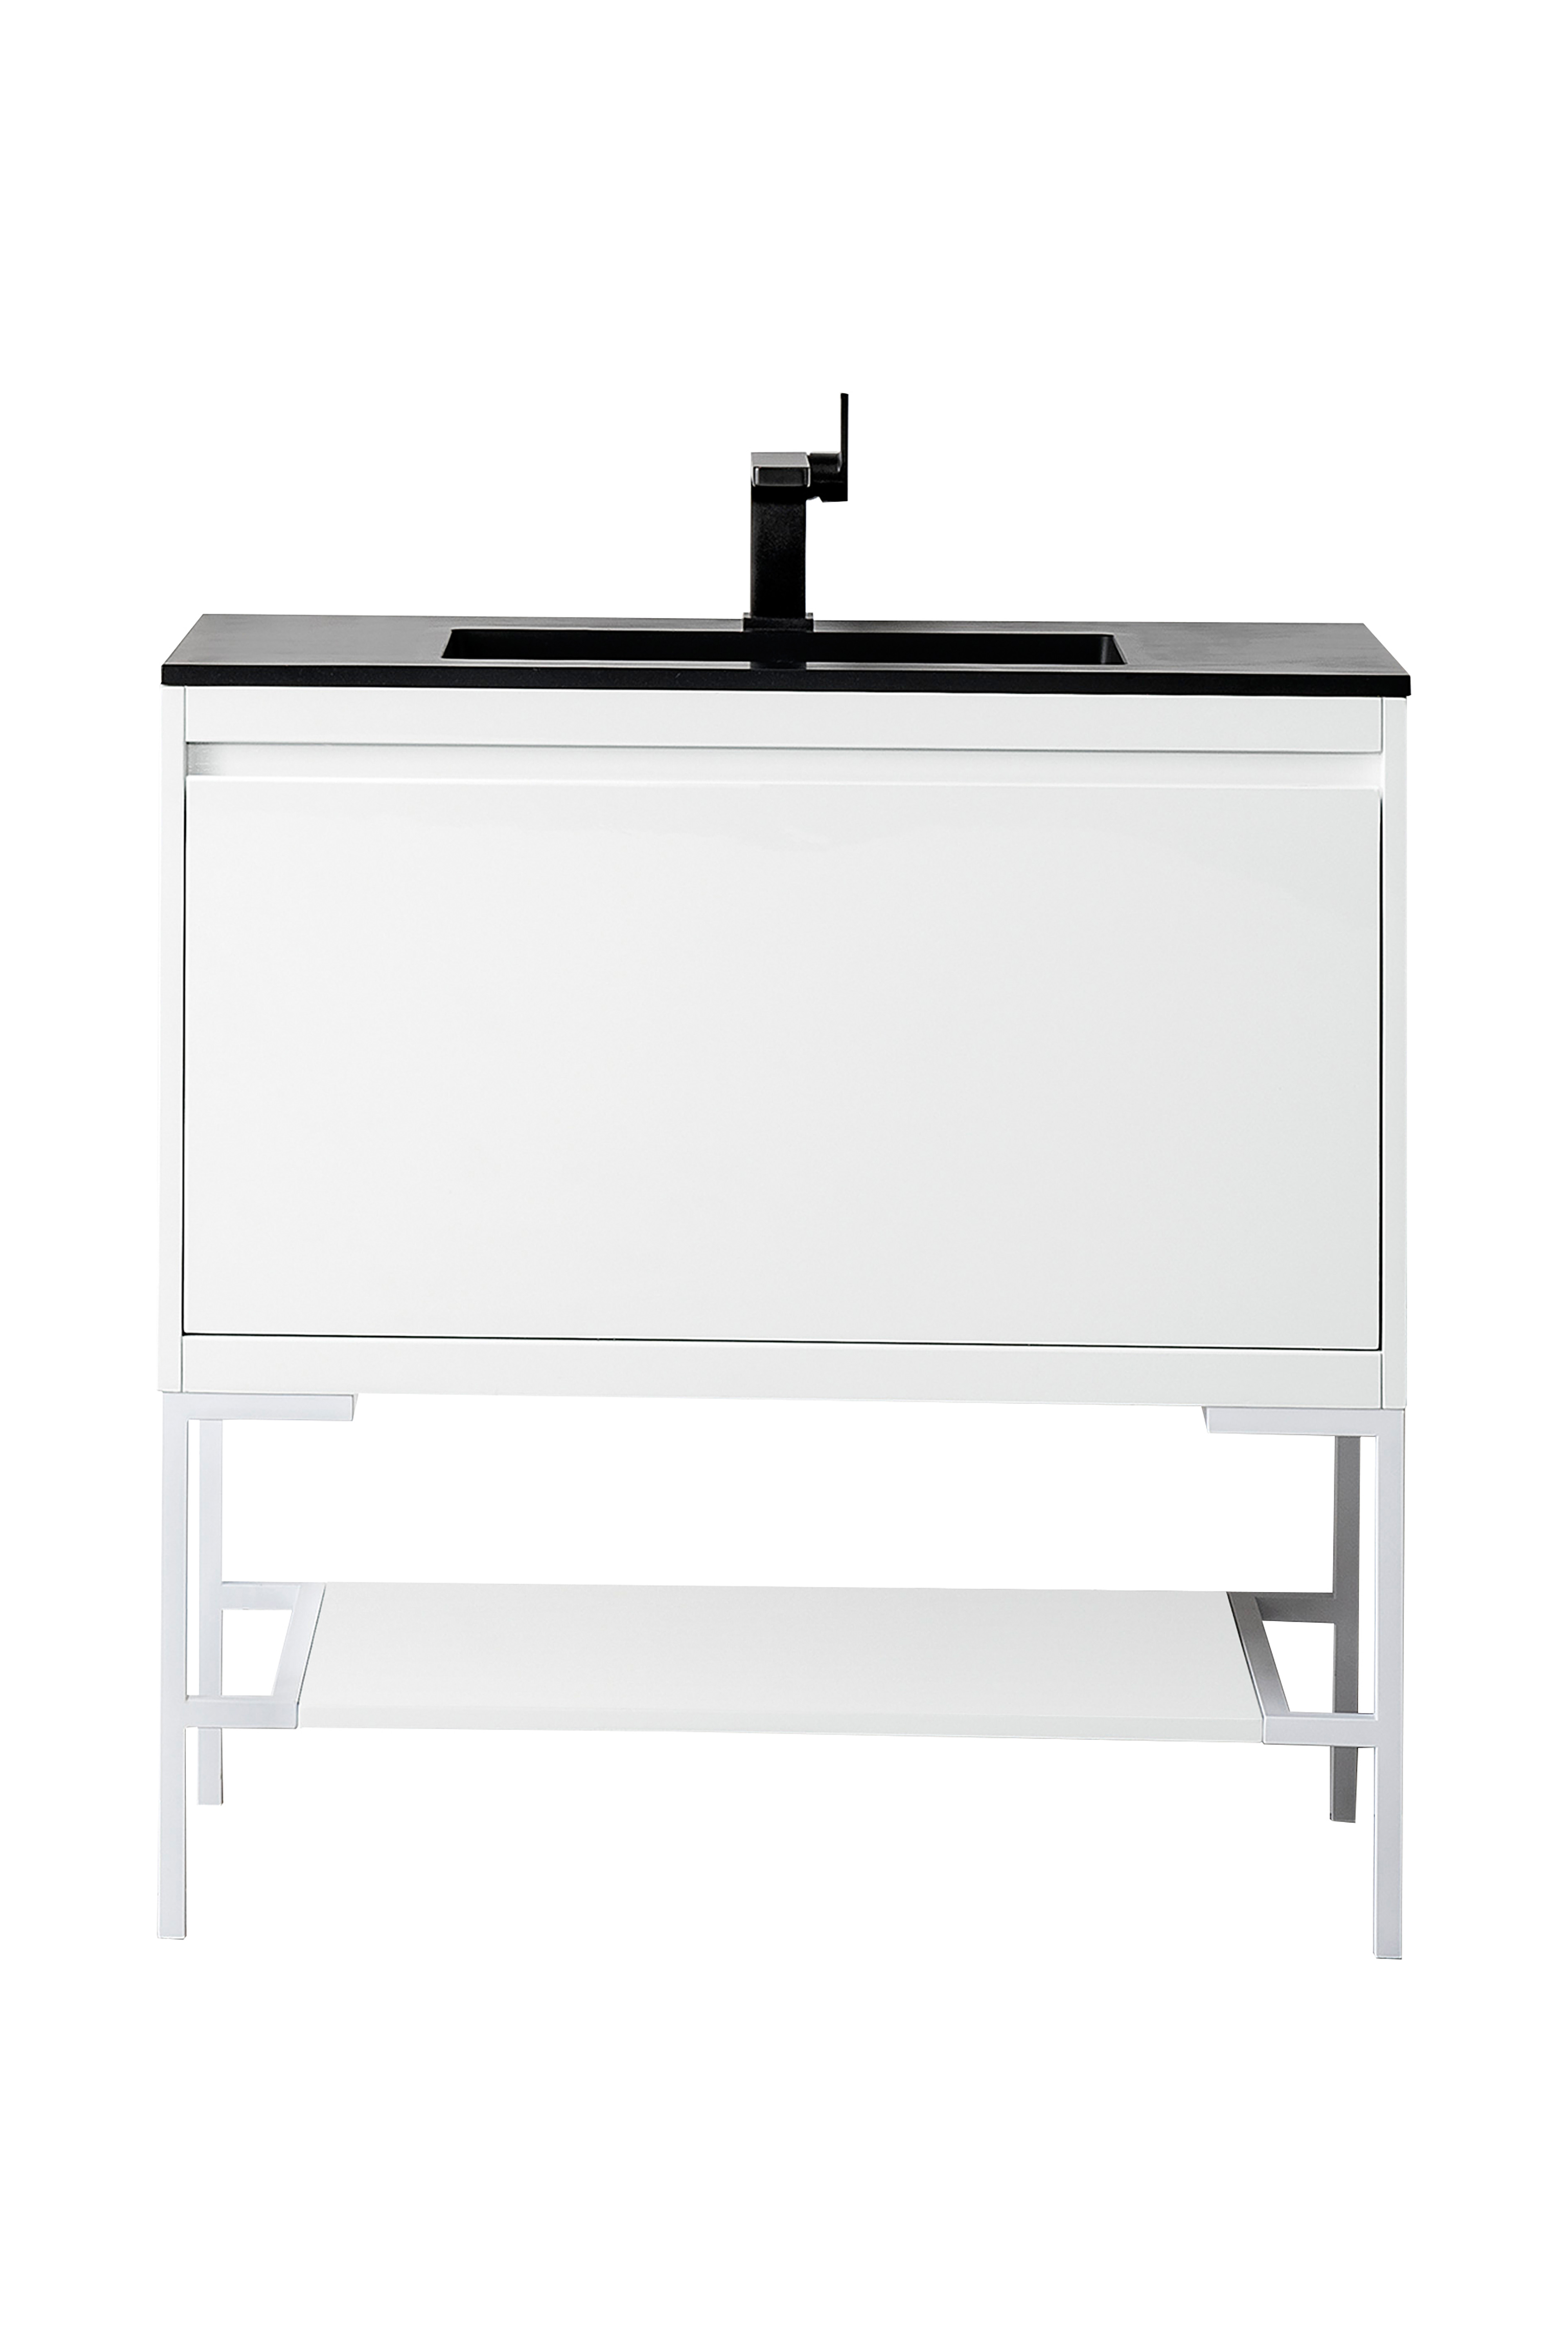 James Martin 801V35.4GWGWCHB Milan 35.4" Single Vanity Cabinet, Glossy White, Glossy White w/Charcoal Black Composite Top